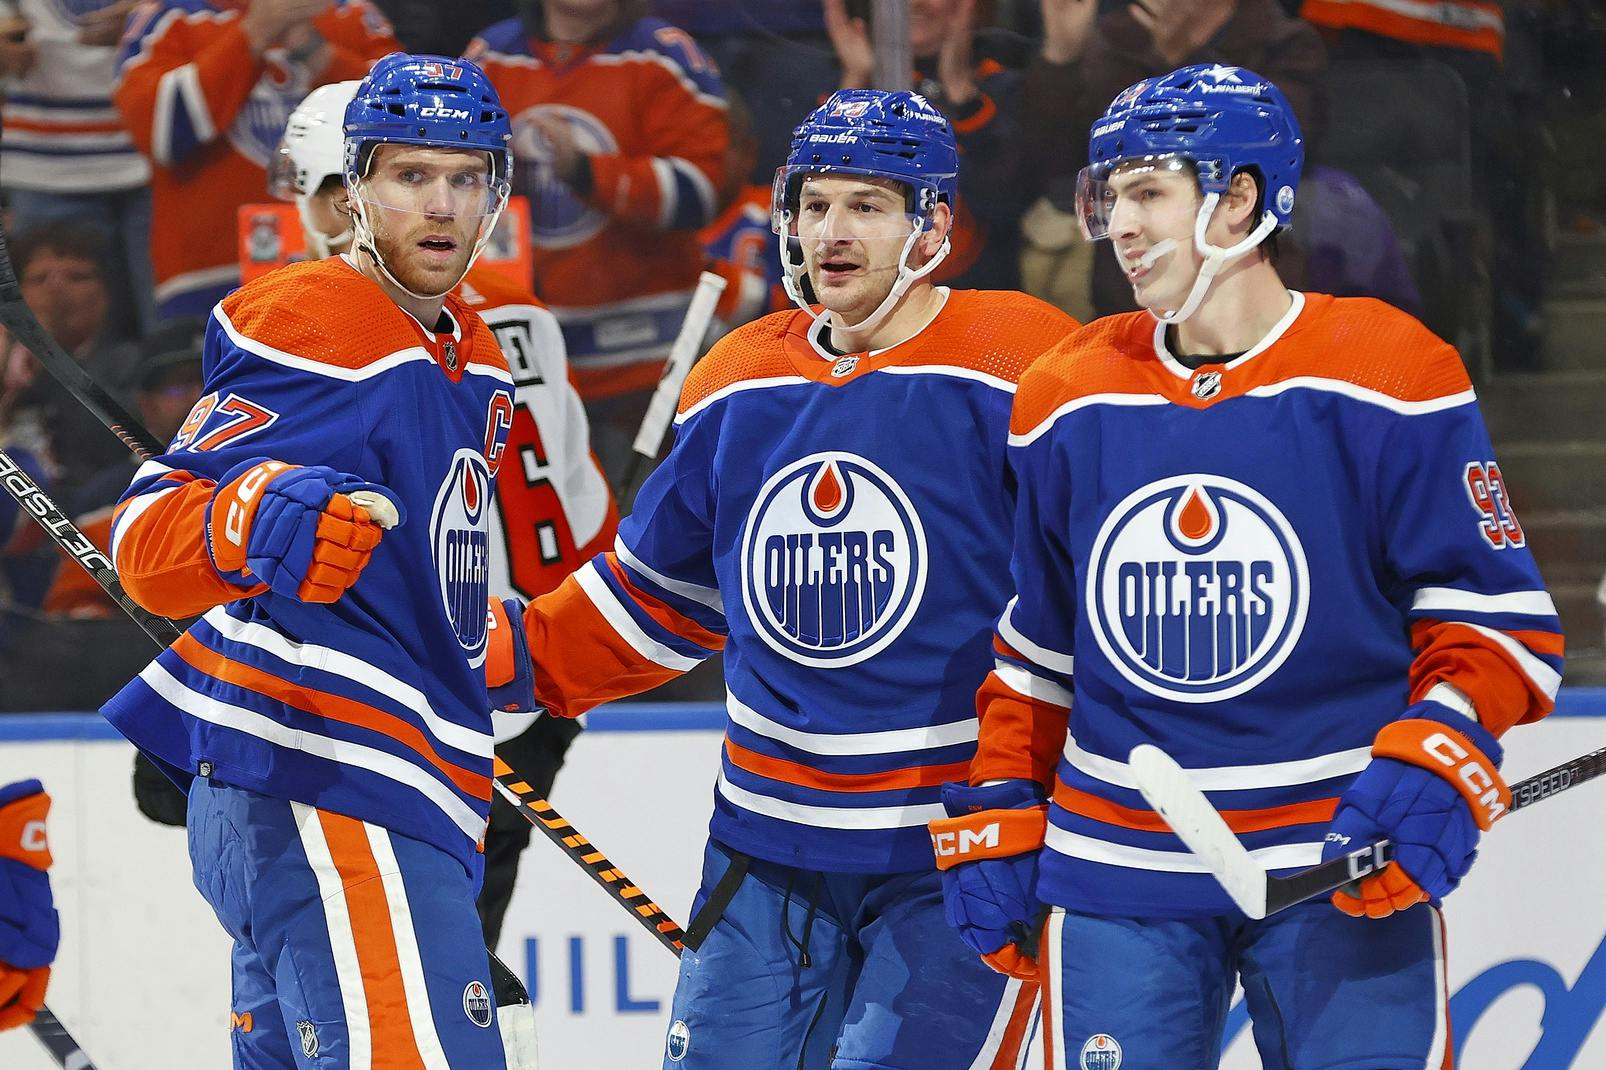 Oilersnation Everyday: Taking on St Louis & Jason Gregor joins the